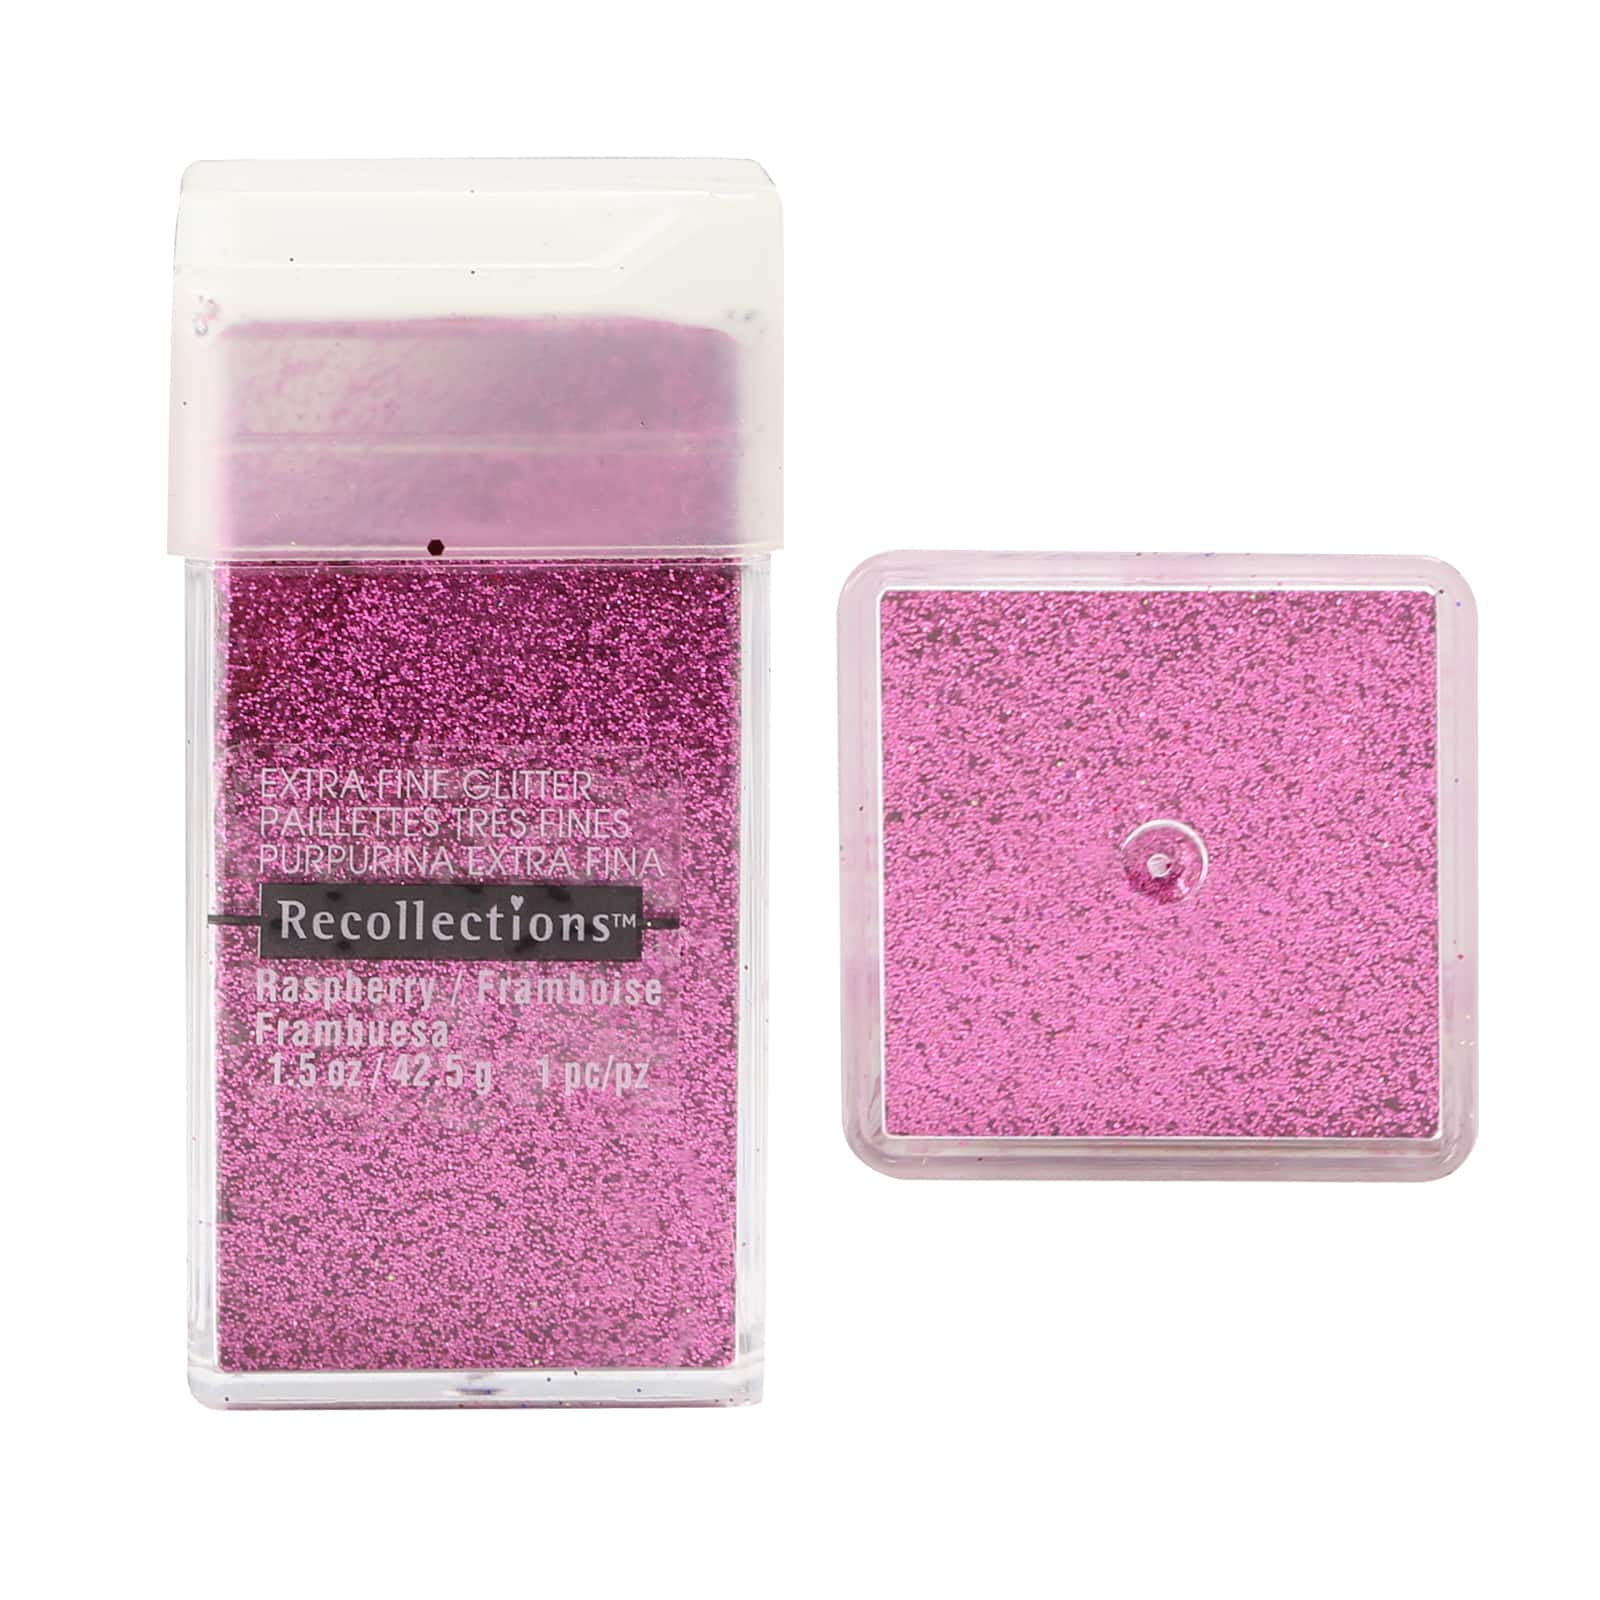 12 Pack: 2oz. Extra Fine Glitter Stacker by ArtMinds™